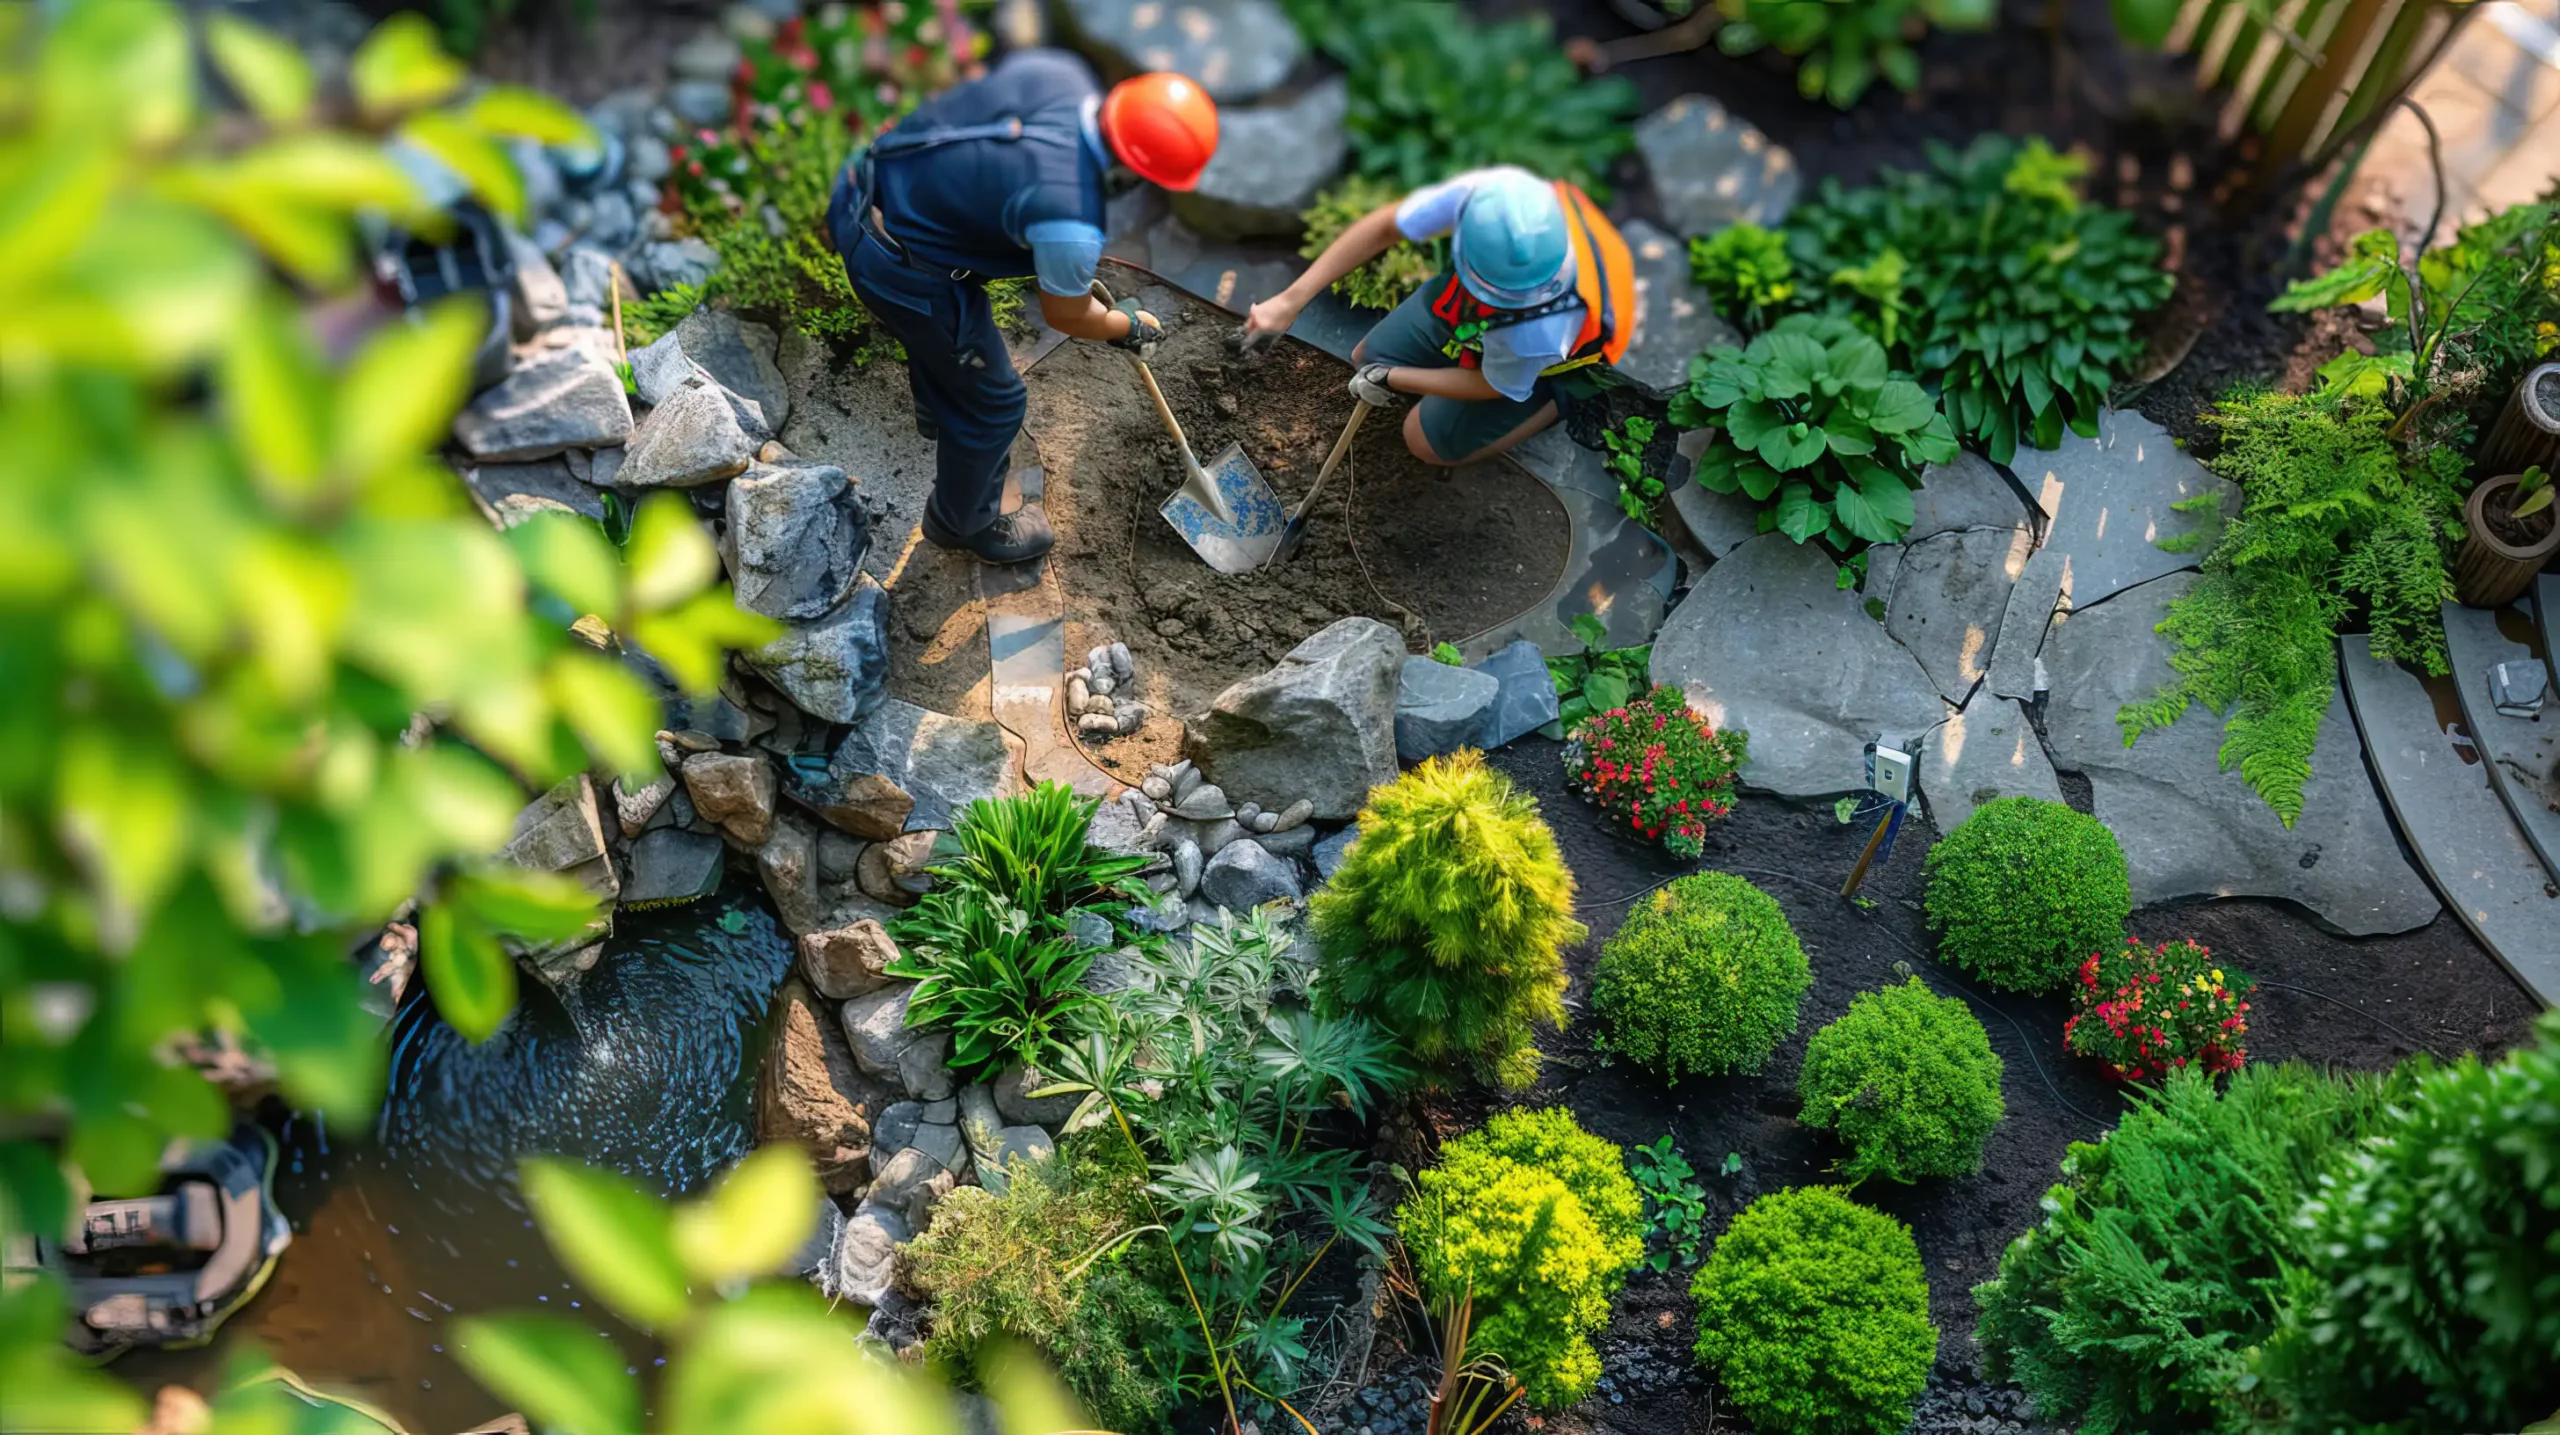 Professional_Landscaping_in_Action1